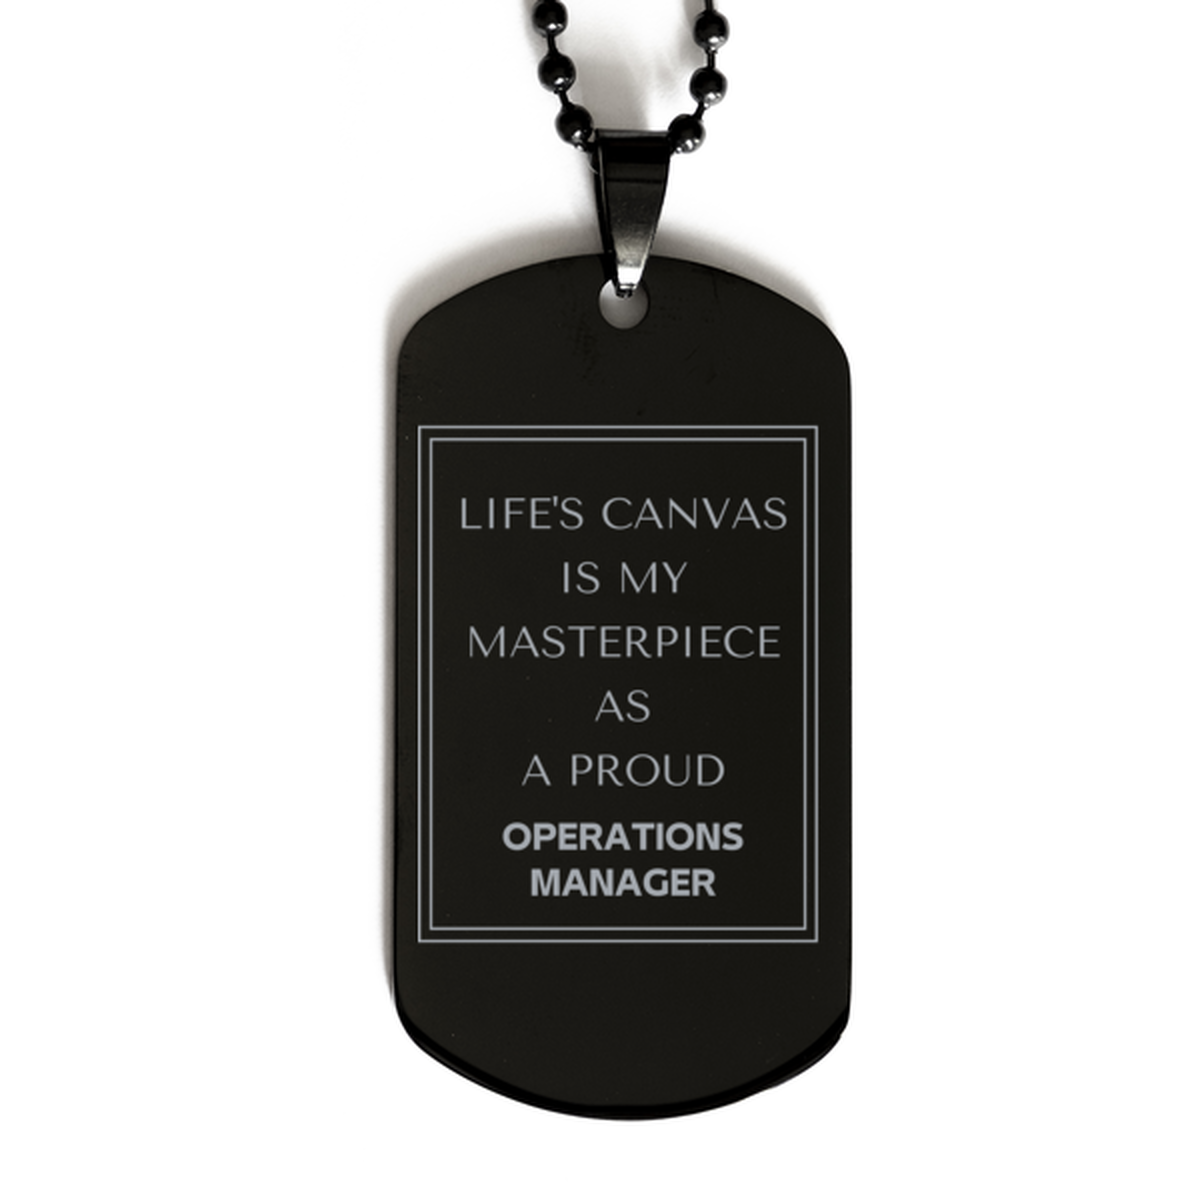 Proud Operations Manager Gifts, Life's canvas is my masterpiece, Epic Birthday Christmas Unique Black Dog Tag For Operations Manager, Coworkers, Men, Women, Friends